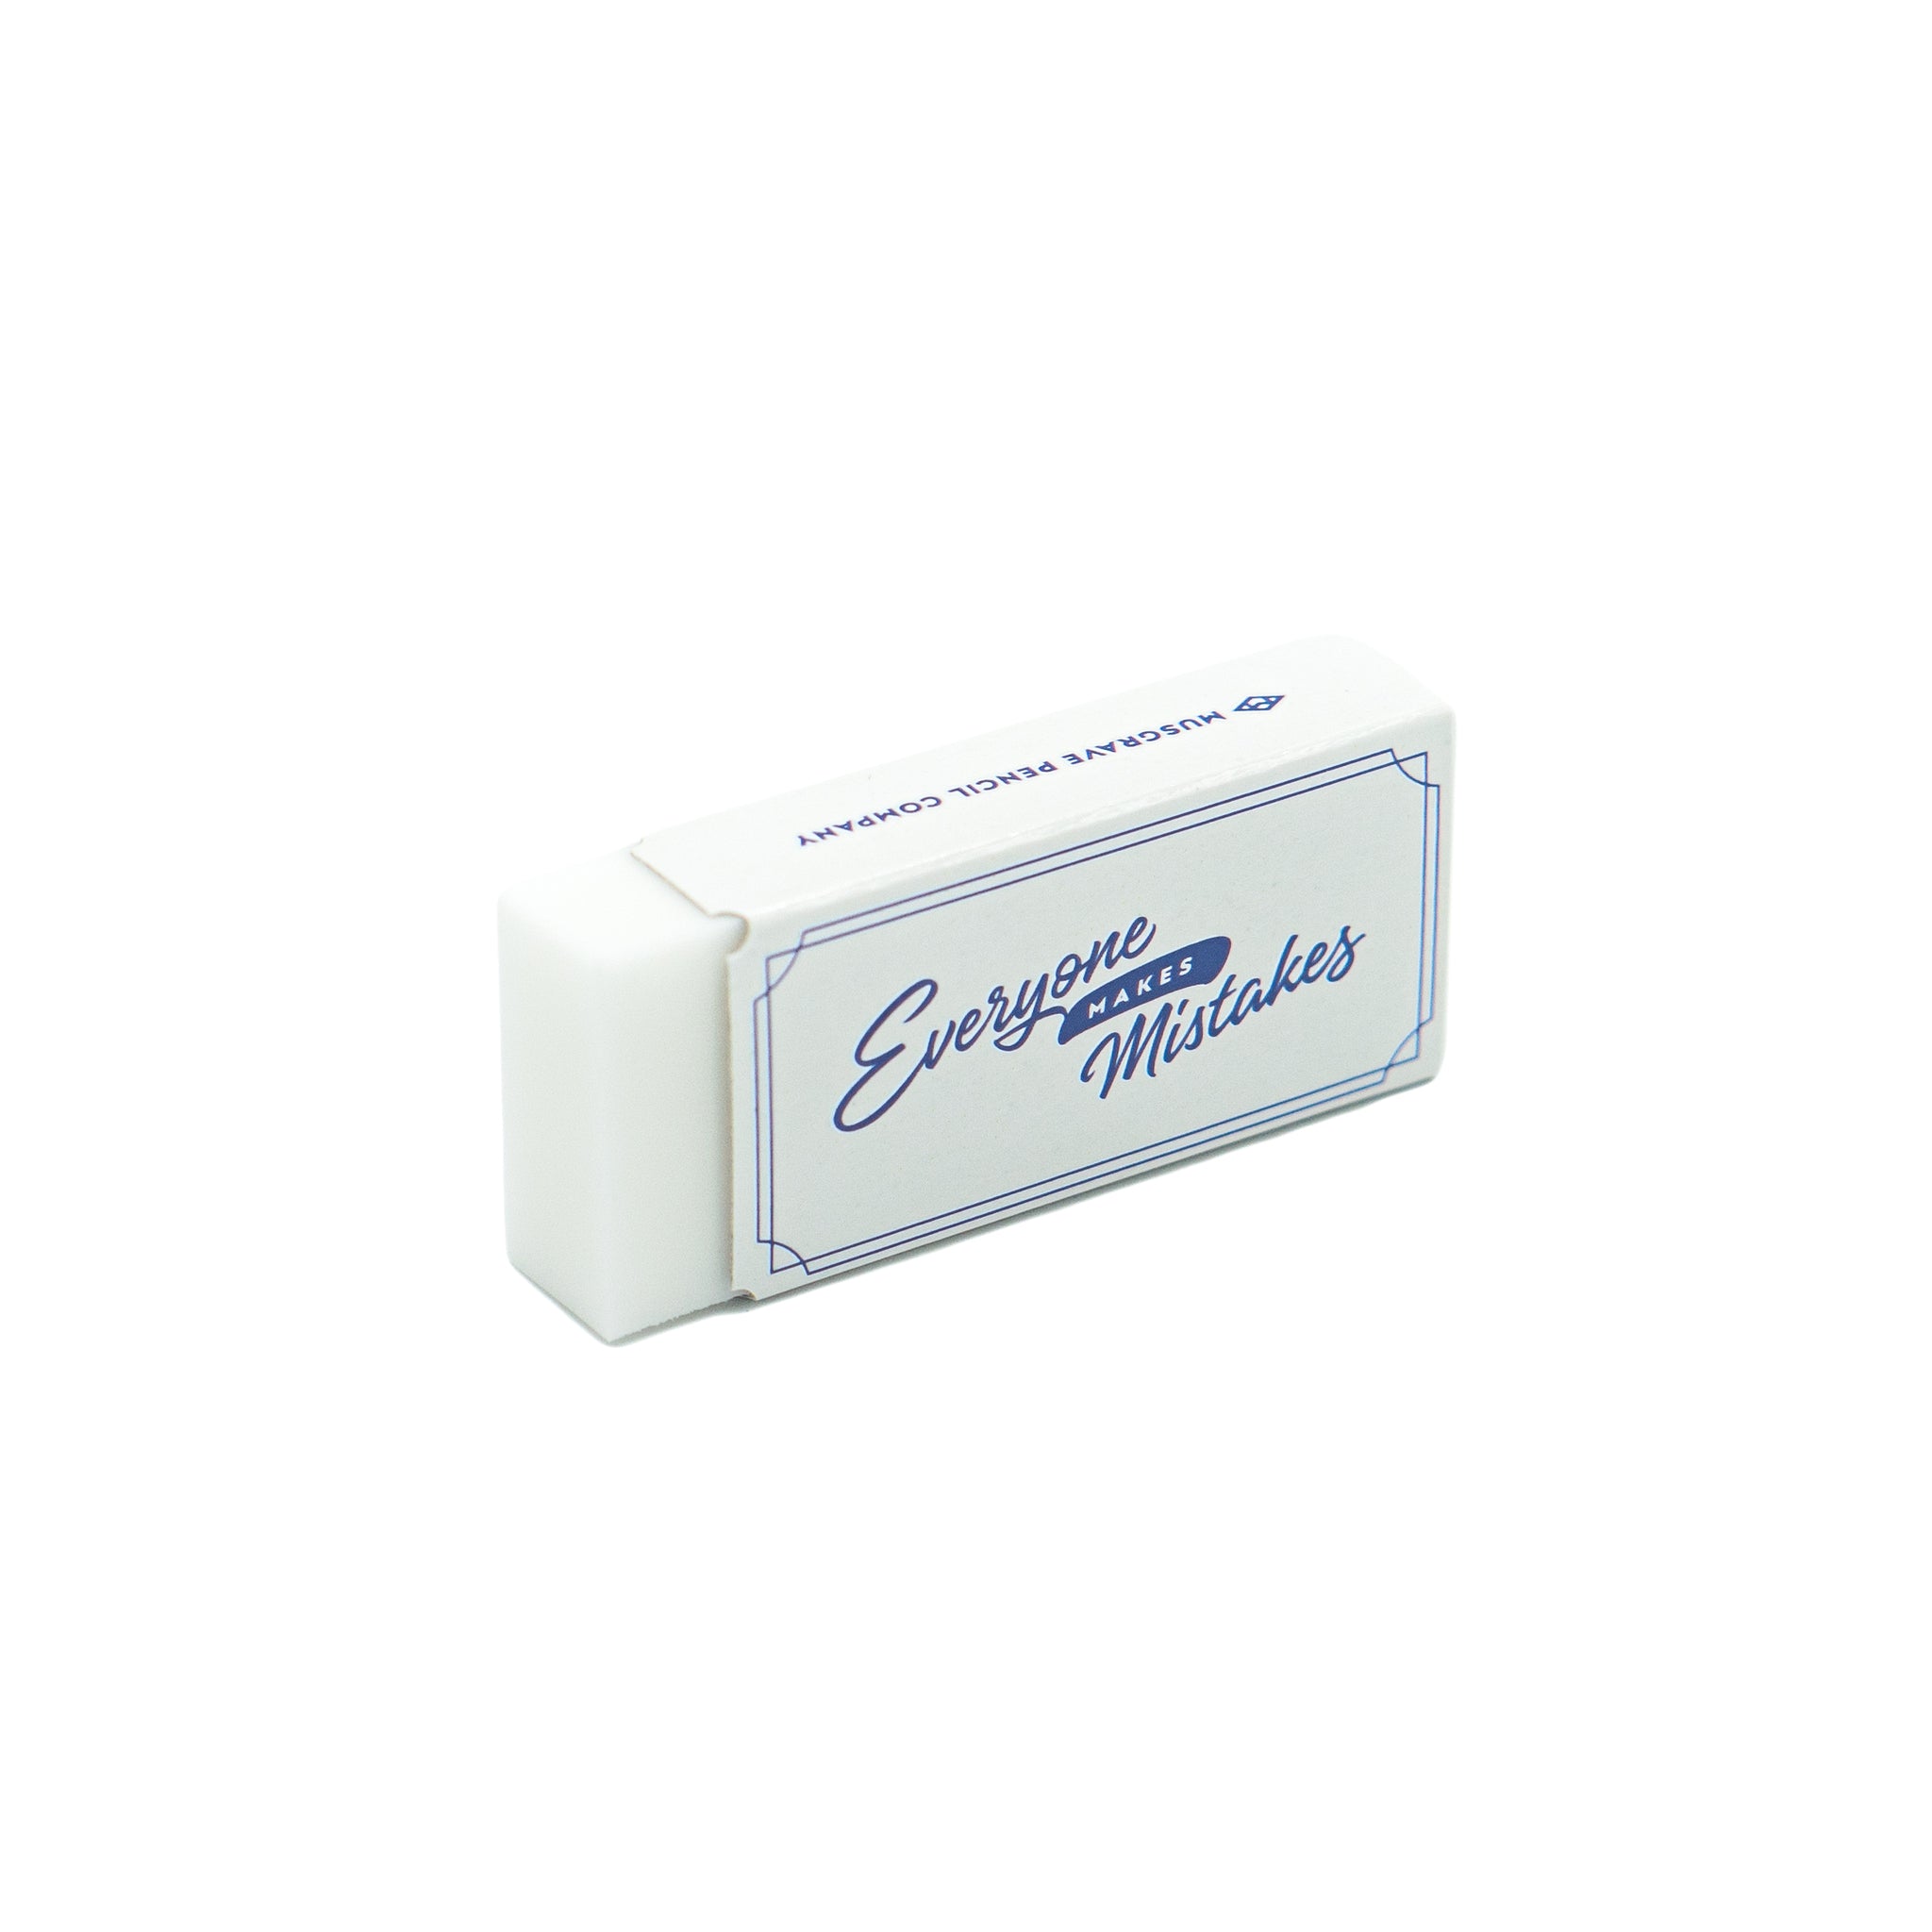 Musgrave-branded Rectangular Erasers - Pack of 2 – Musgrave Pencil